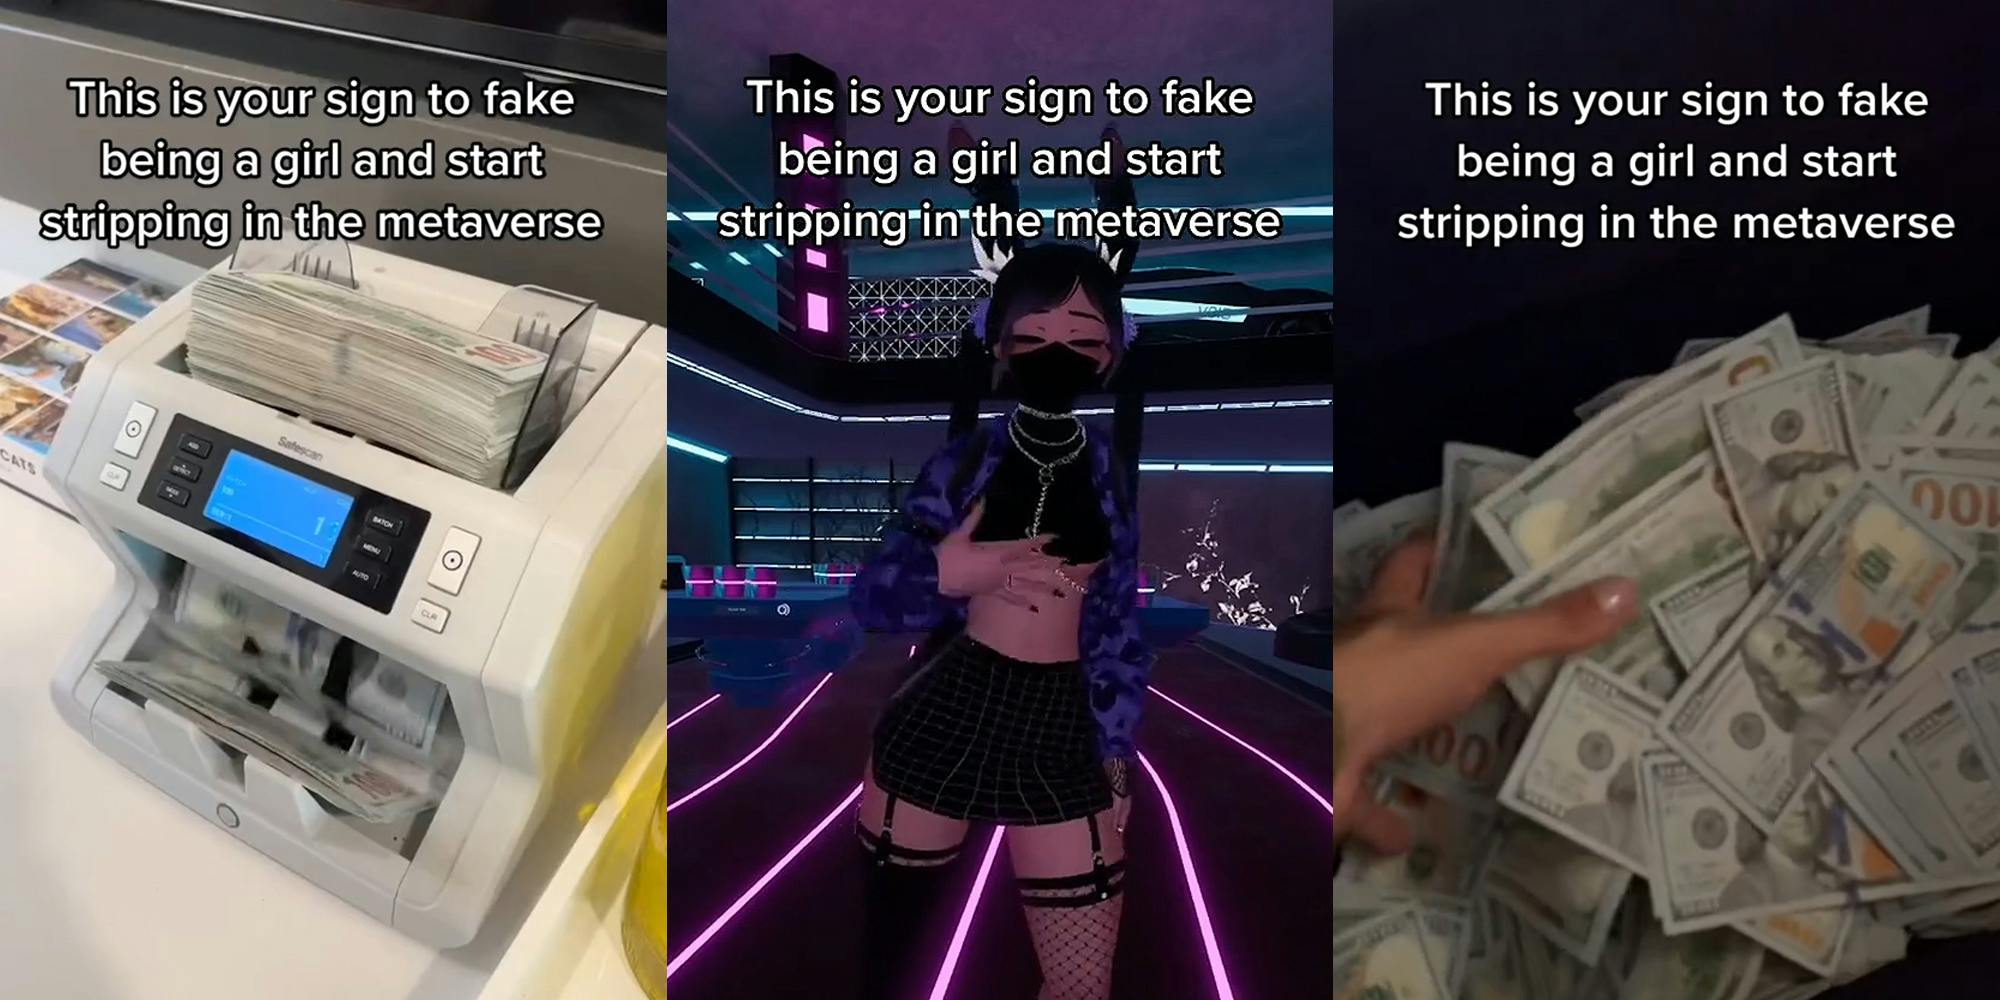 money counting machine counting caption "This is your sign to fake being a girl and start stripping in the metaverse"(l) Anime girl dancing in VR caption "This is your sign to fake being a girl and start stripping in the metaverse"(c) person holding 100 dollar bills caption "This is your sign to fake being a girl and start stripping in the metaverse" (r)